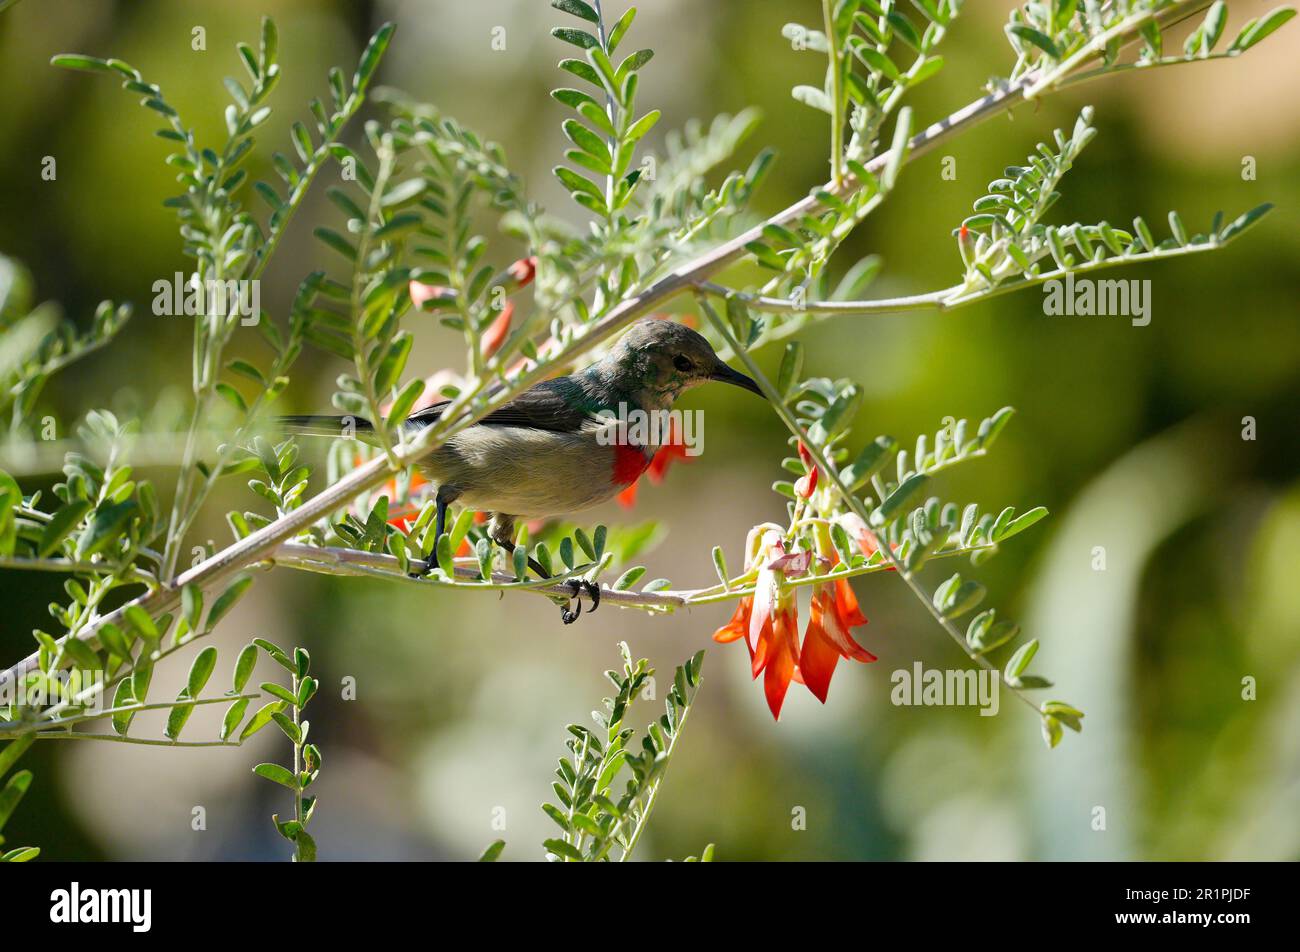 Southern Double-collared Sunbird (Cinnyris chalybeus), endemic to Southern Africa, feeding on Kankerbos (Lessertia frutescens) Hermanus, South Africa Stock Photo